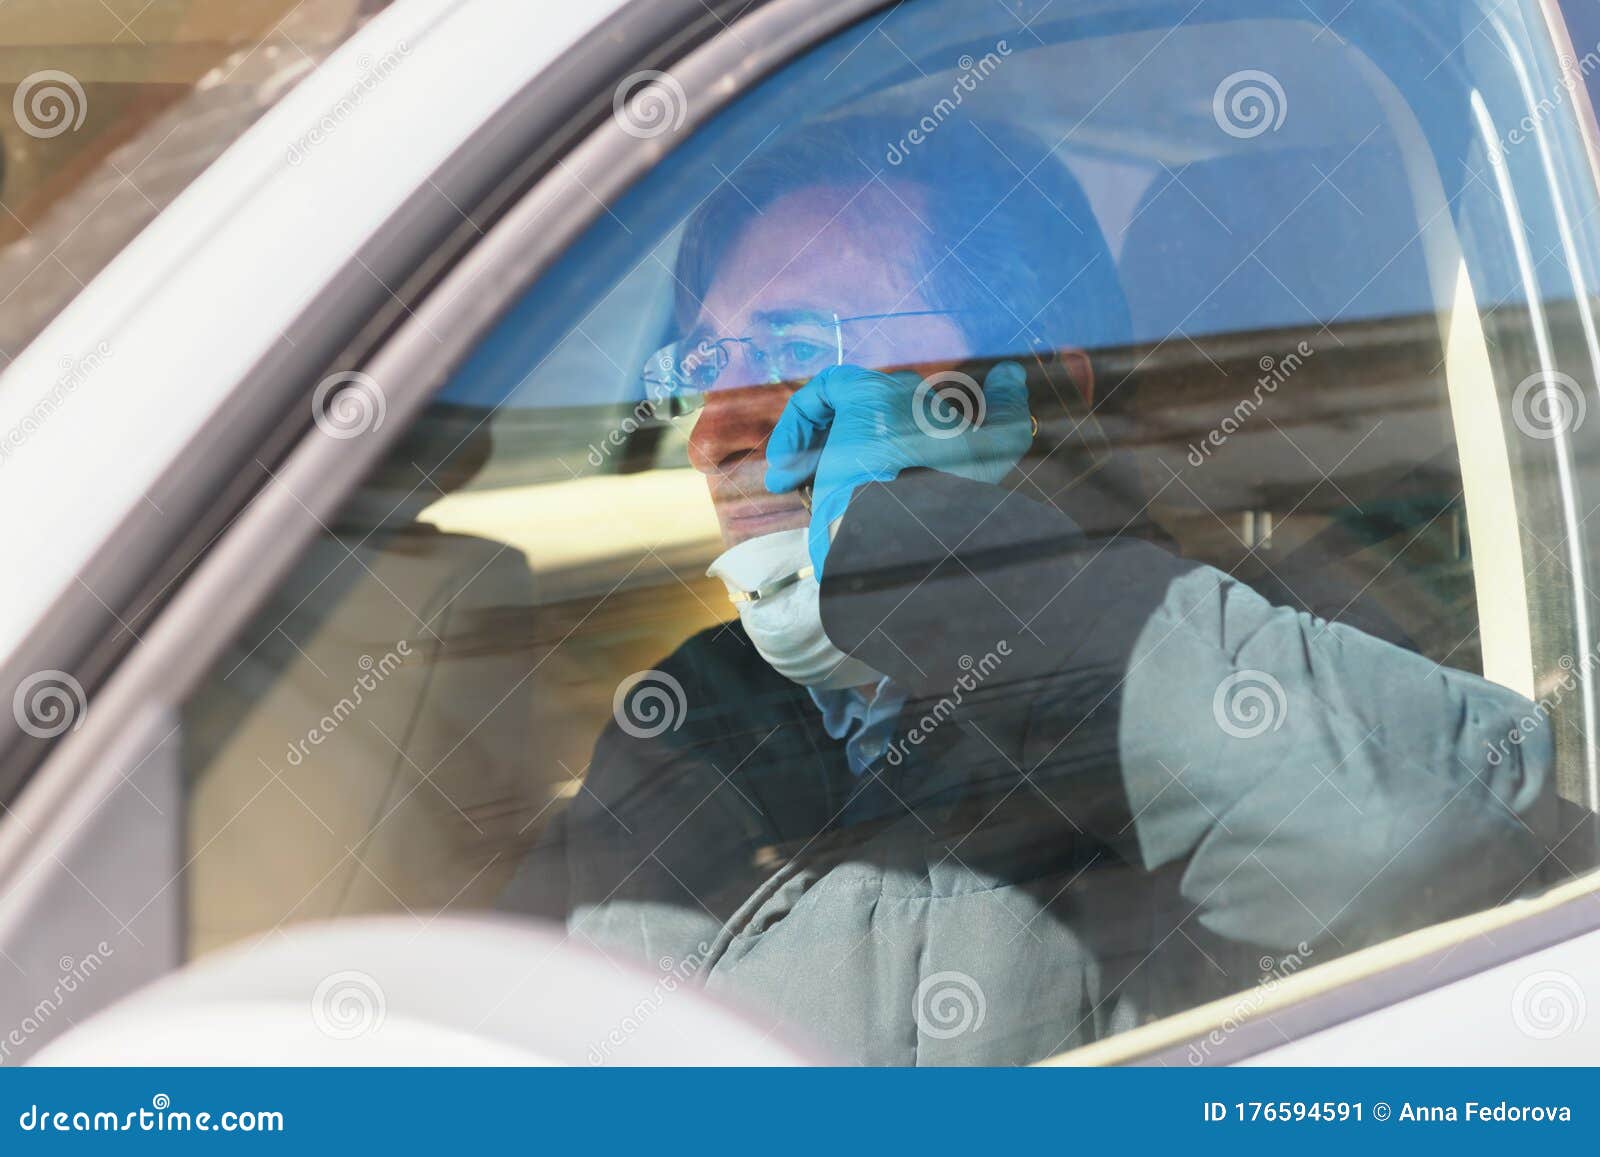 a man driving in a car with a protective mask and gloves is talking on the phone, epidemia of coronavirus. work during quarantine